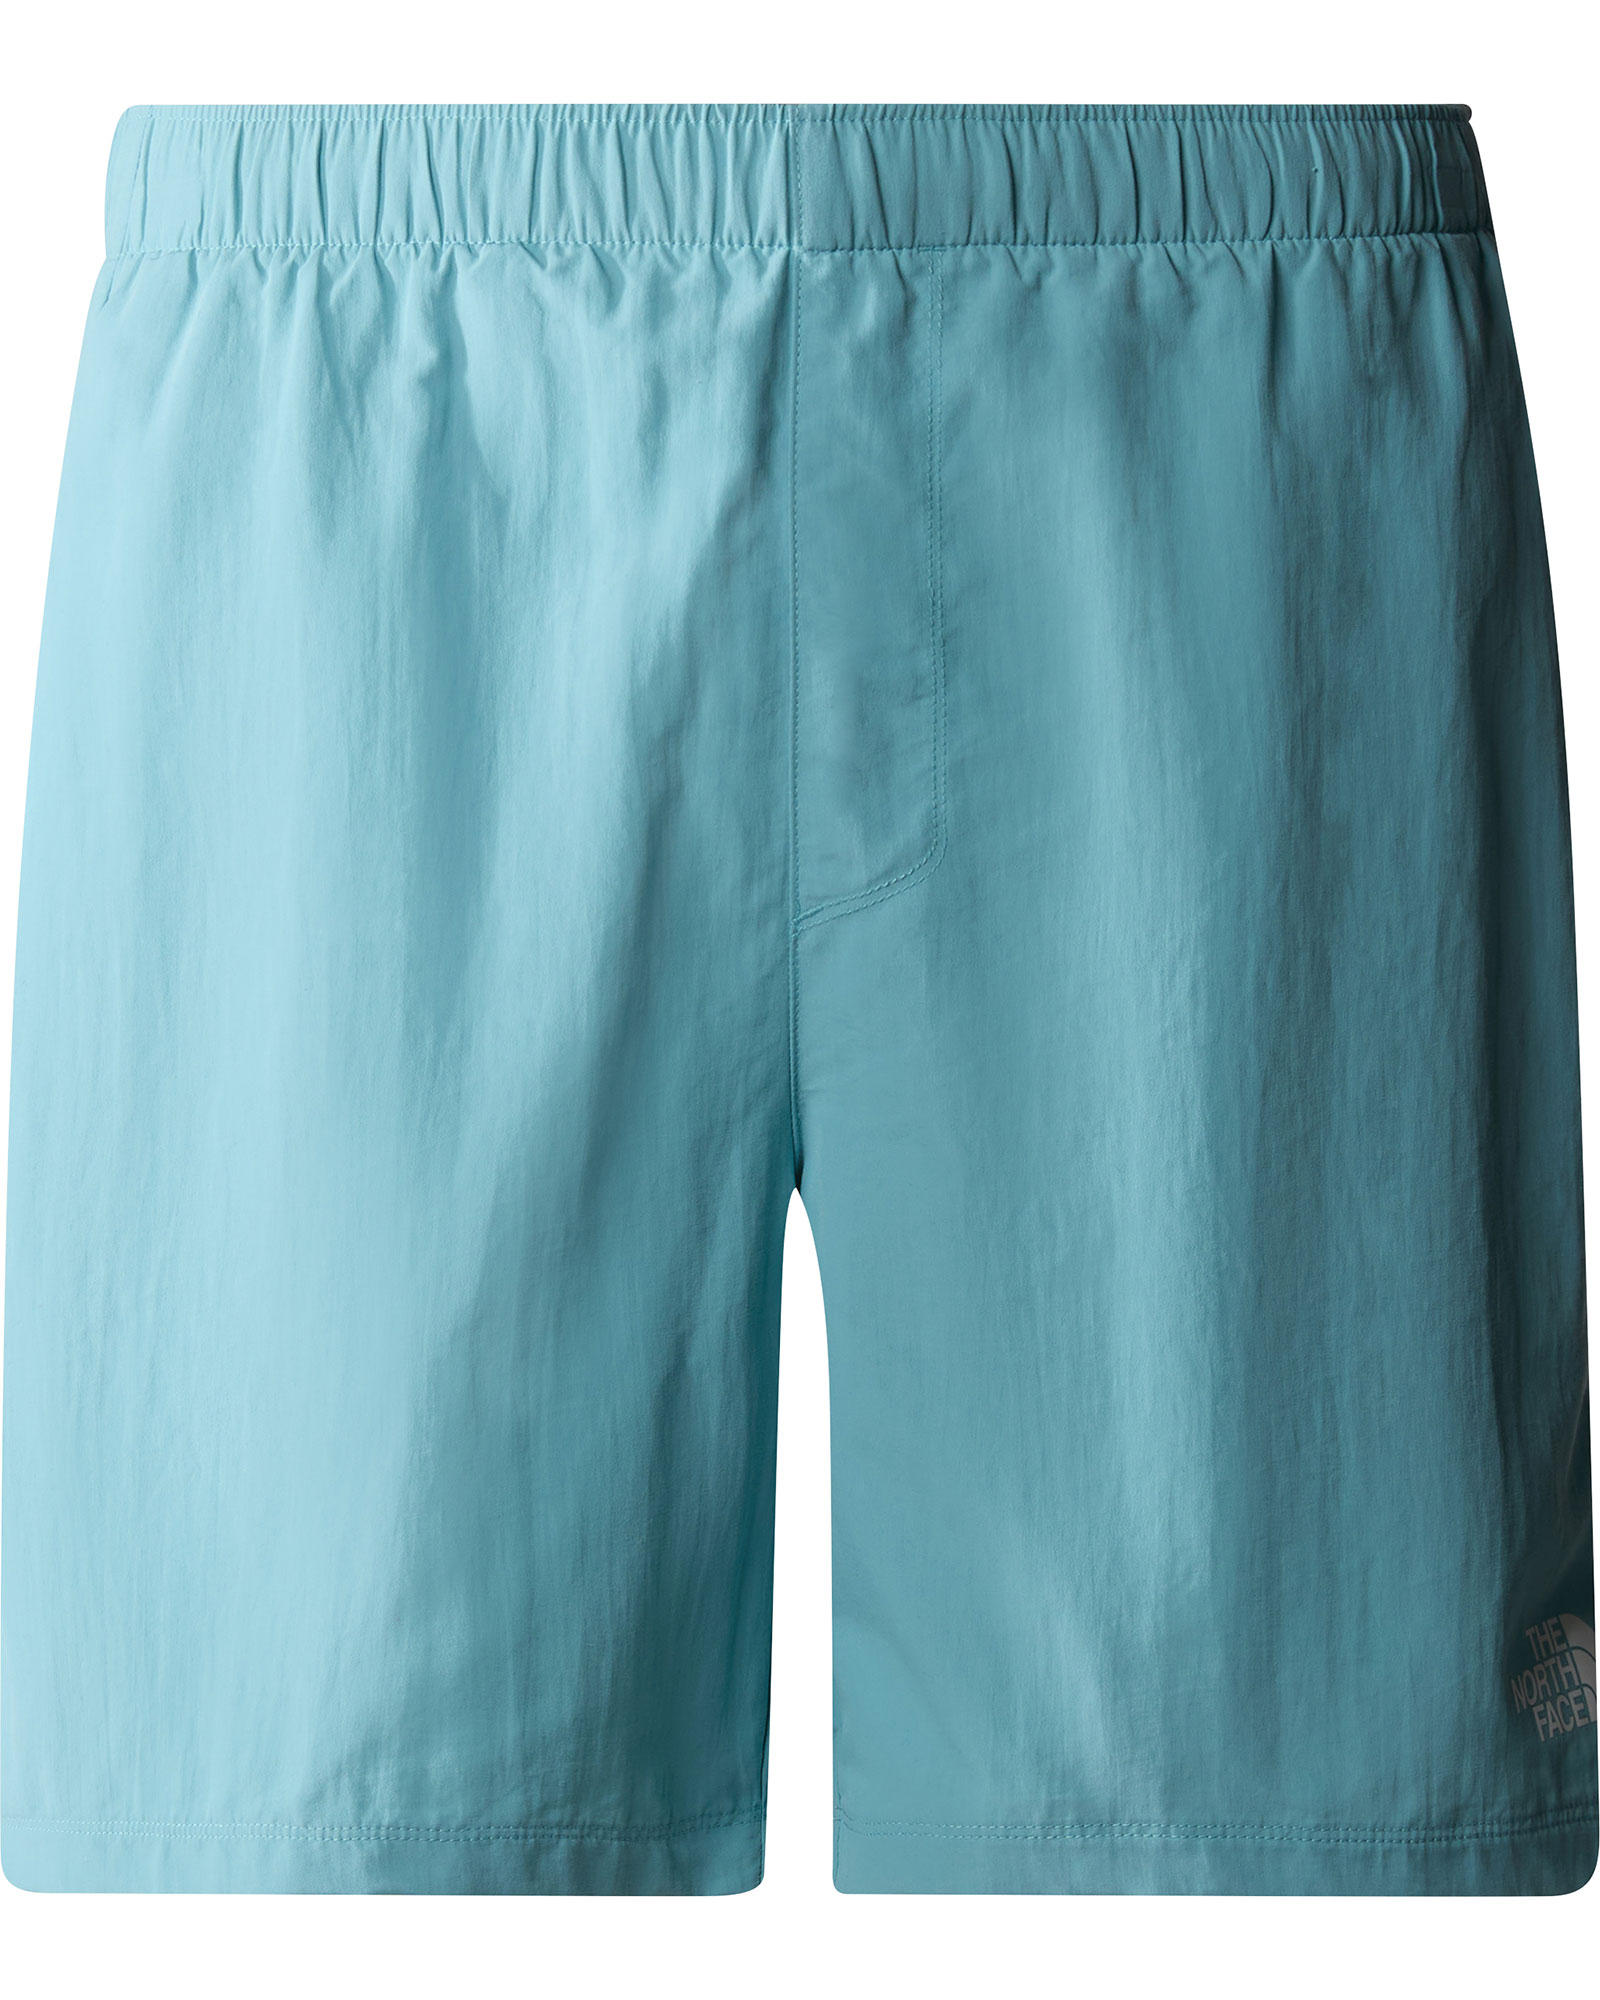 The North Face Men's Water Shorts